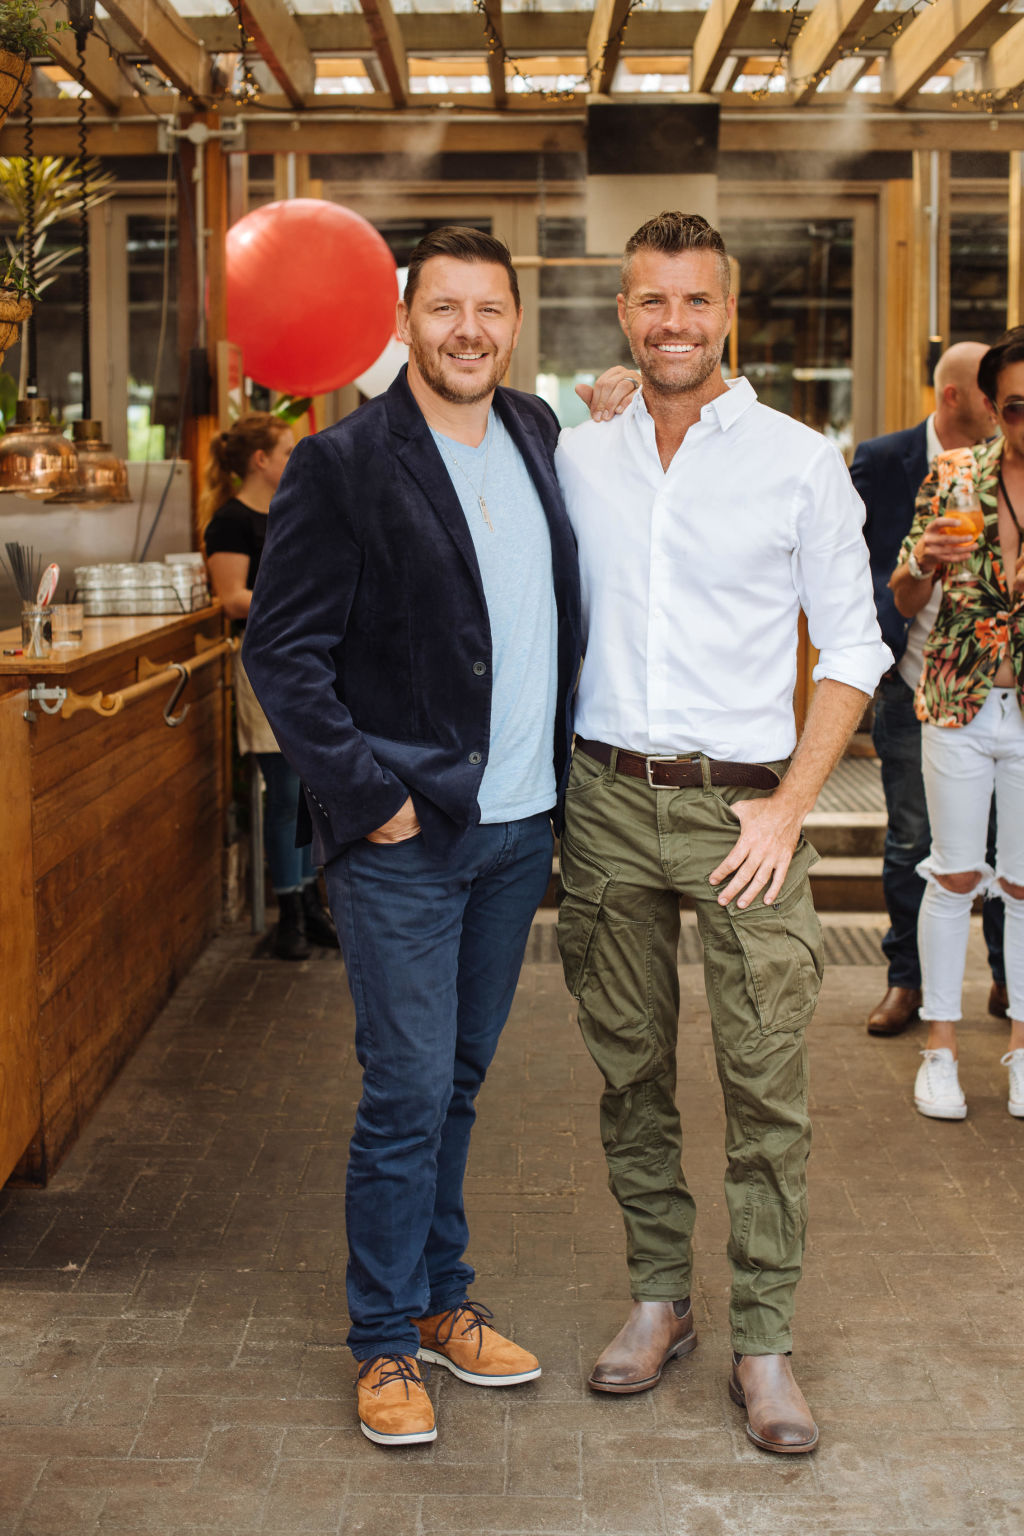 Pete and Manu from My Kitchen Rules. Photo: Paul McMillan